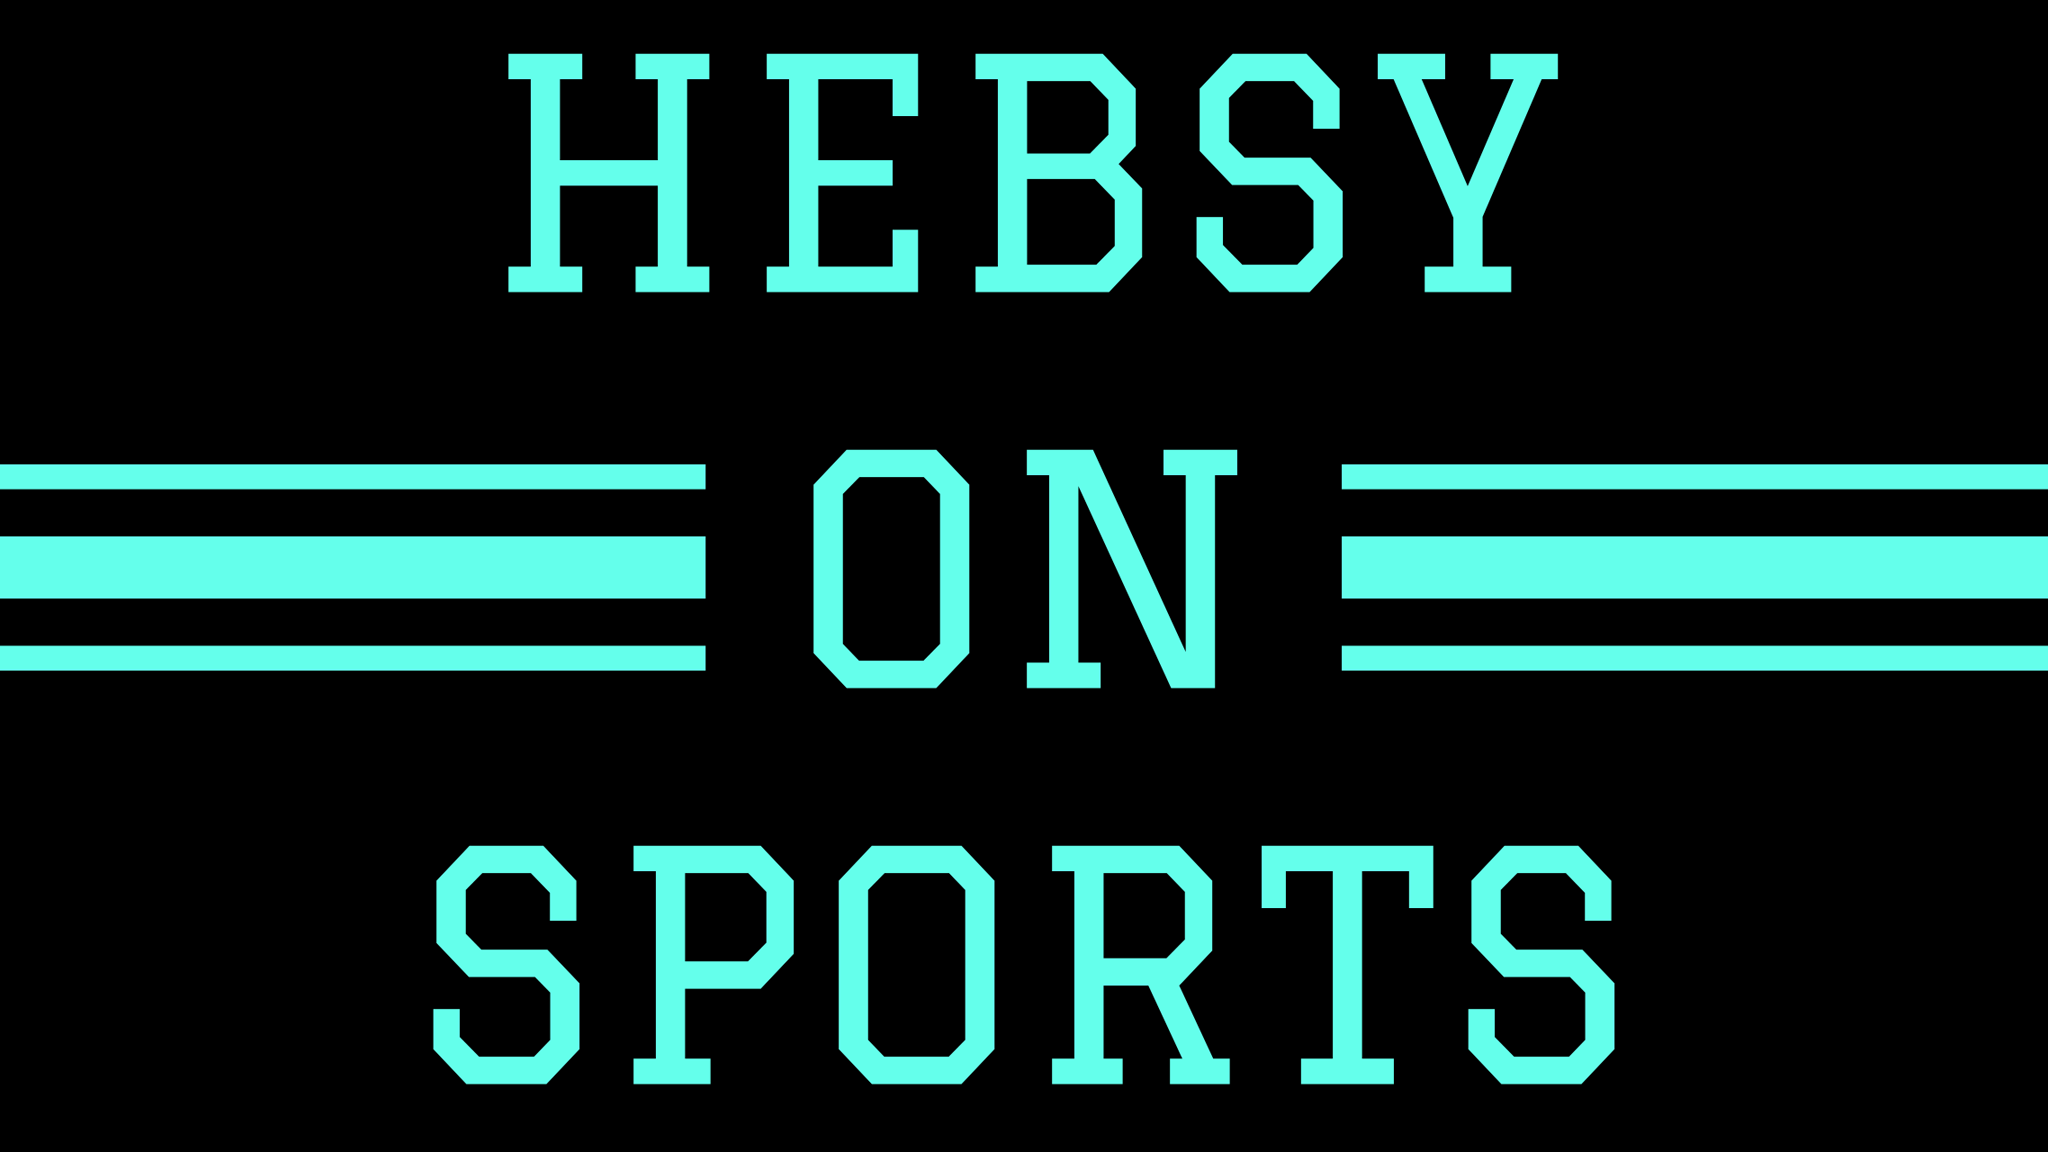 Hebsy on Sports for August 6, 2021